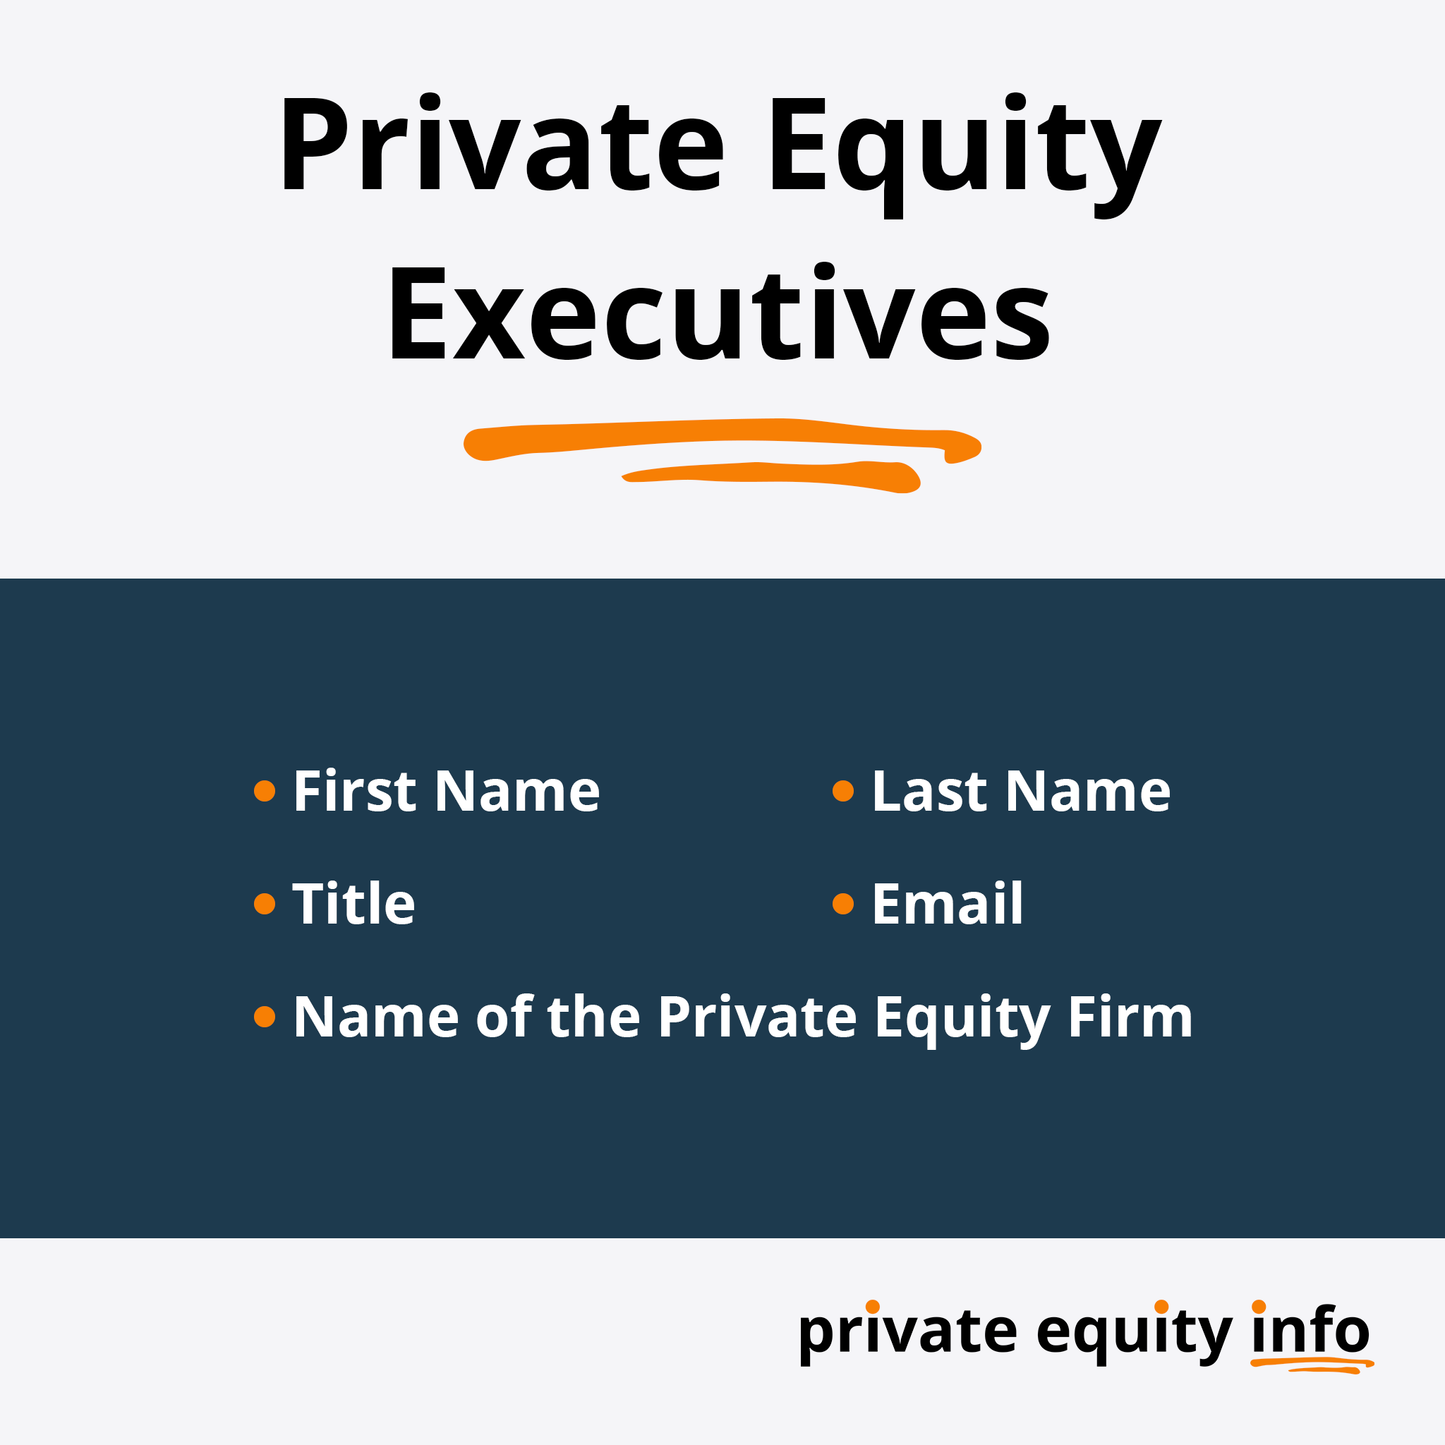 Private Equity Firms in Wisconsin and Indiana